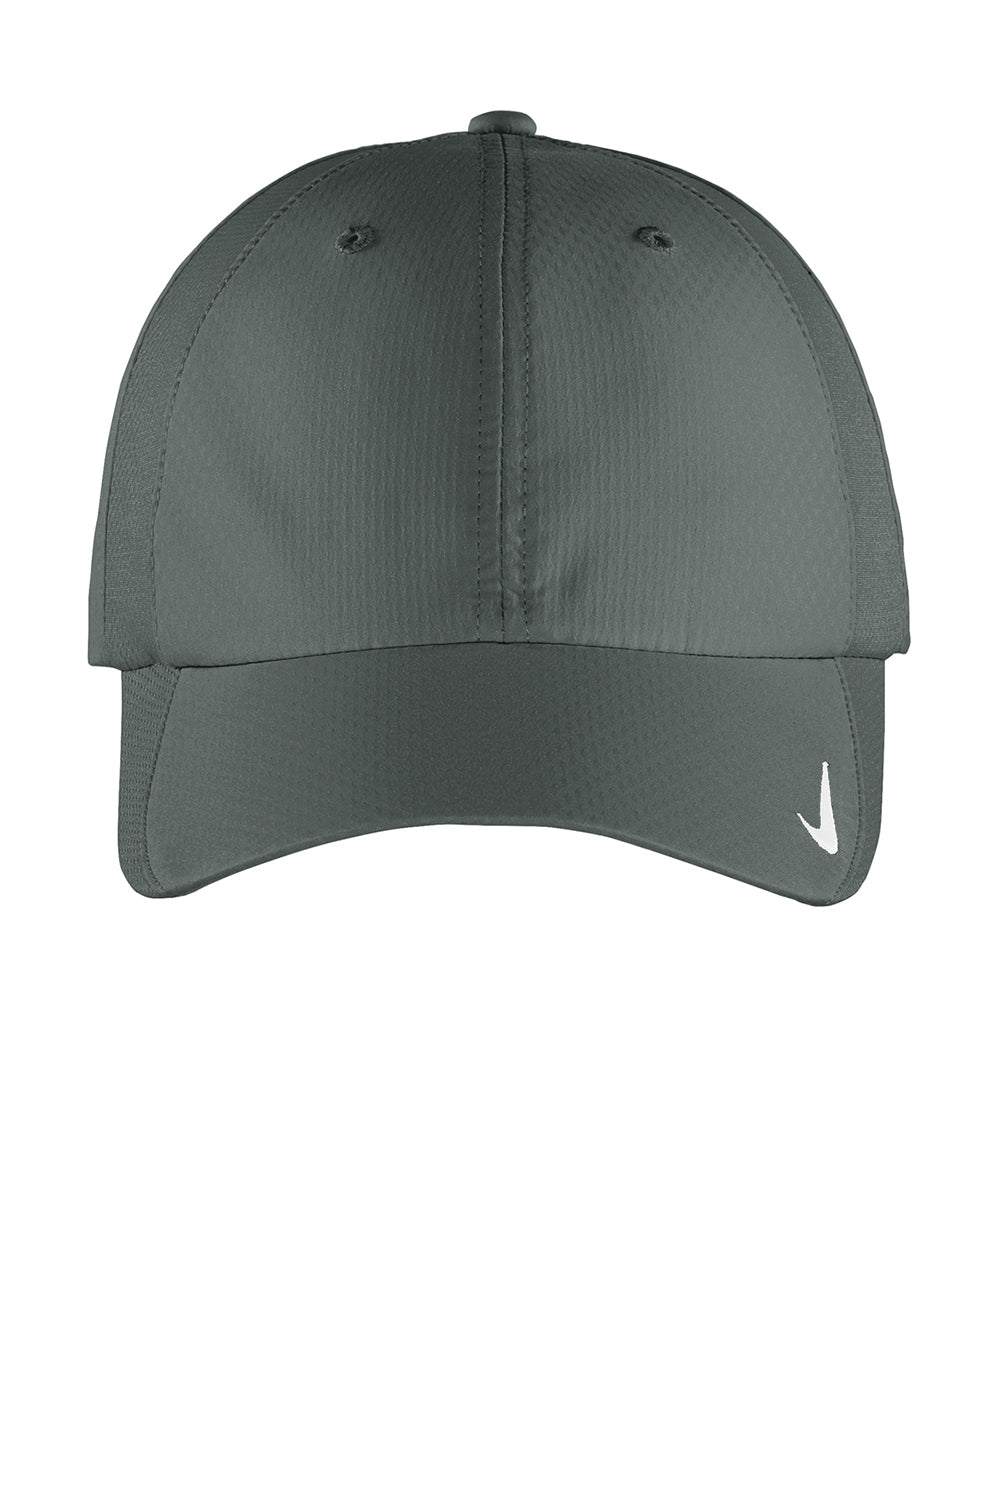 Nike 247077/NKFD9709 Mens Sphere Dry Moisture Wicking Adjustable Hat Anthracite Grey Flat Front